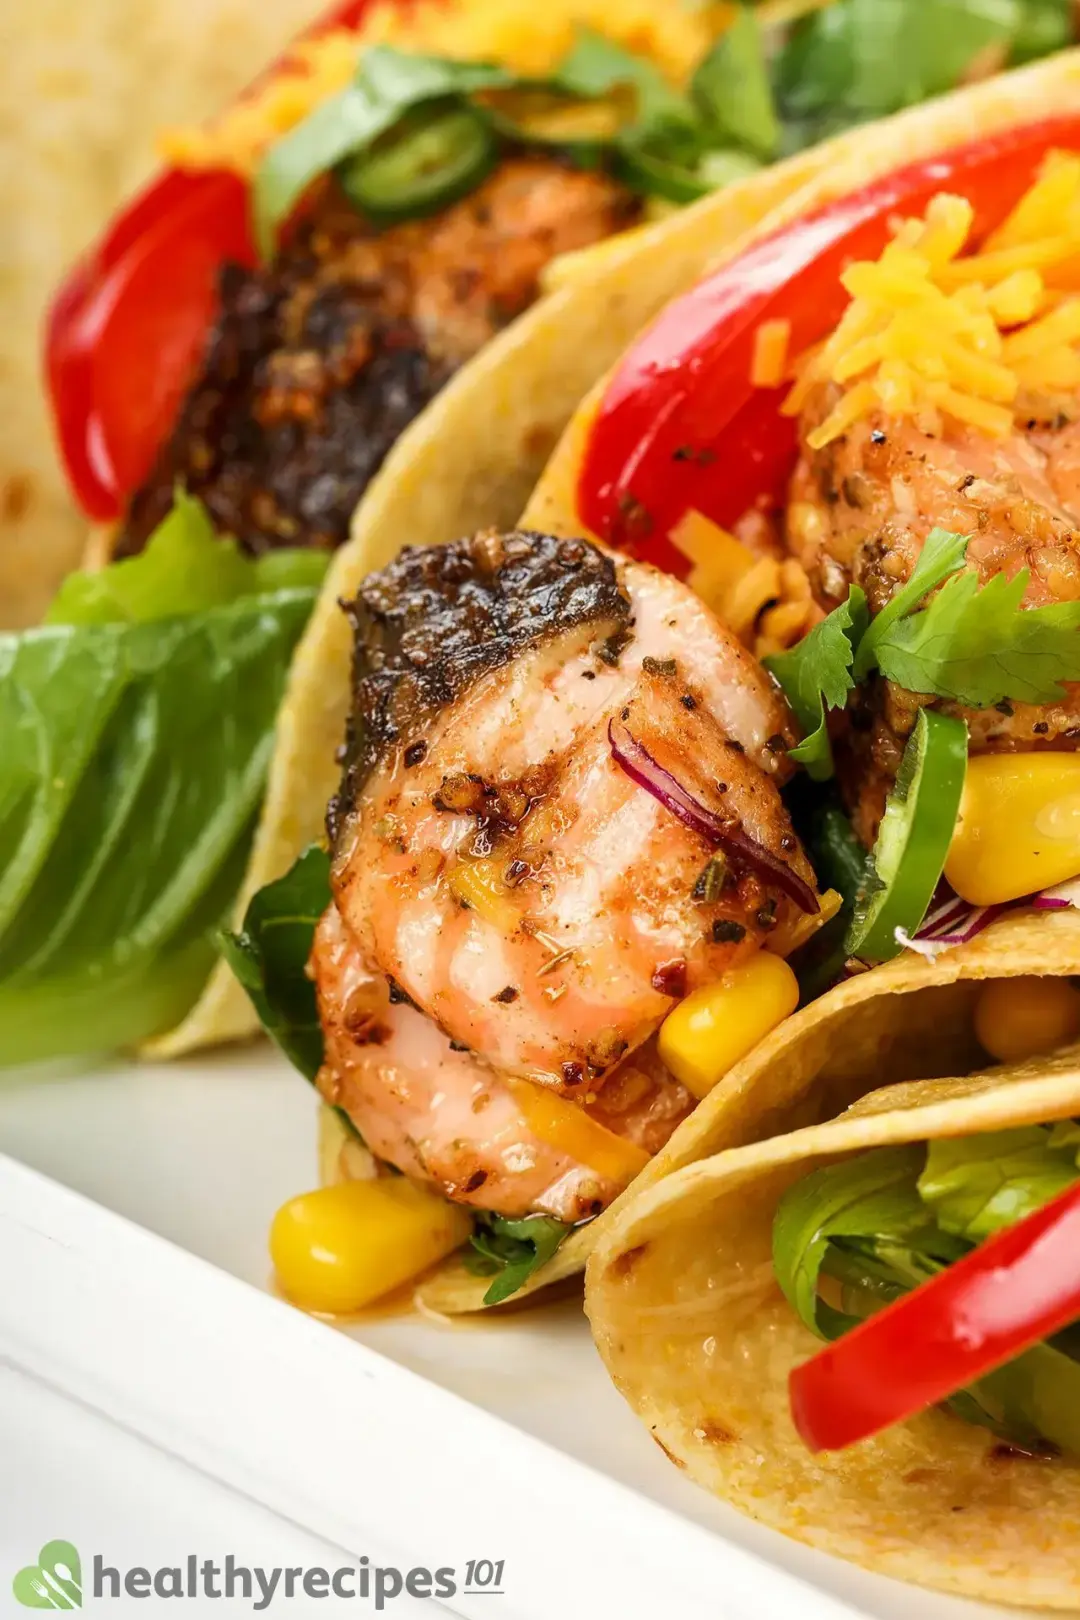 Are Salmon Tacos Healthy